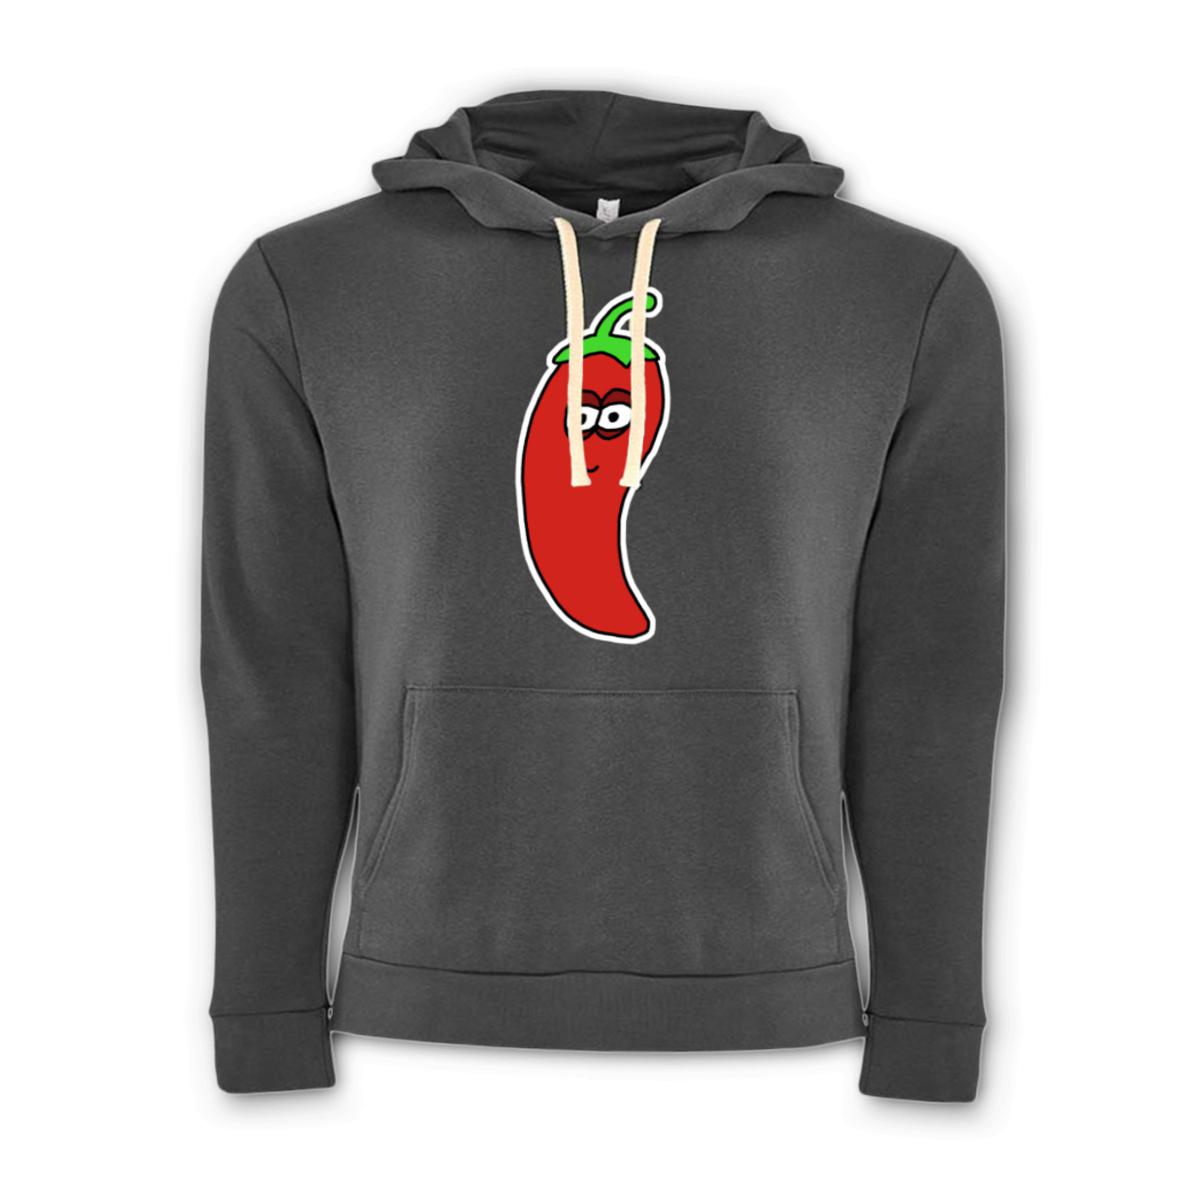 Chili Pepper Unisex Pullover Hoodie Large heavy-metal